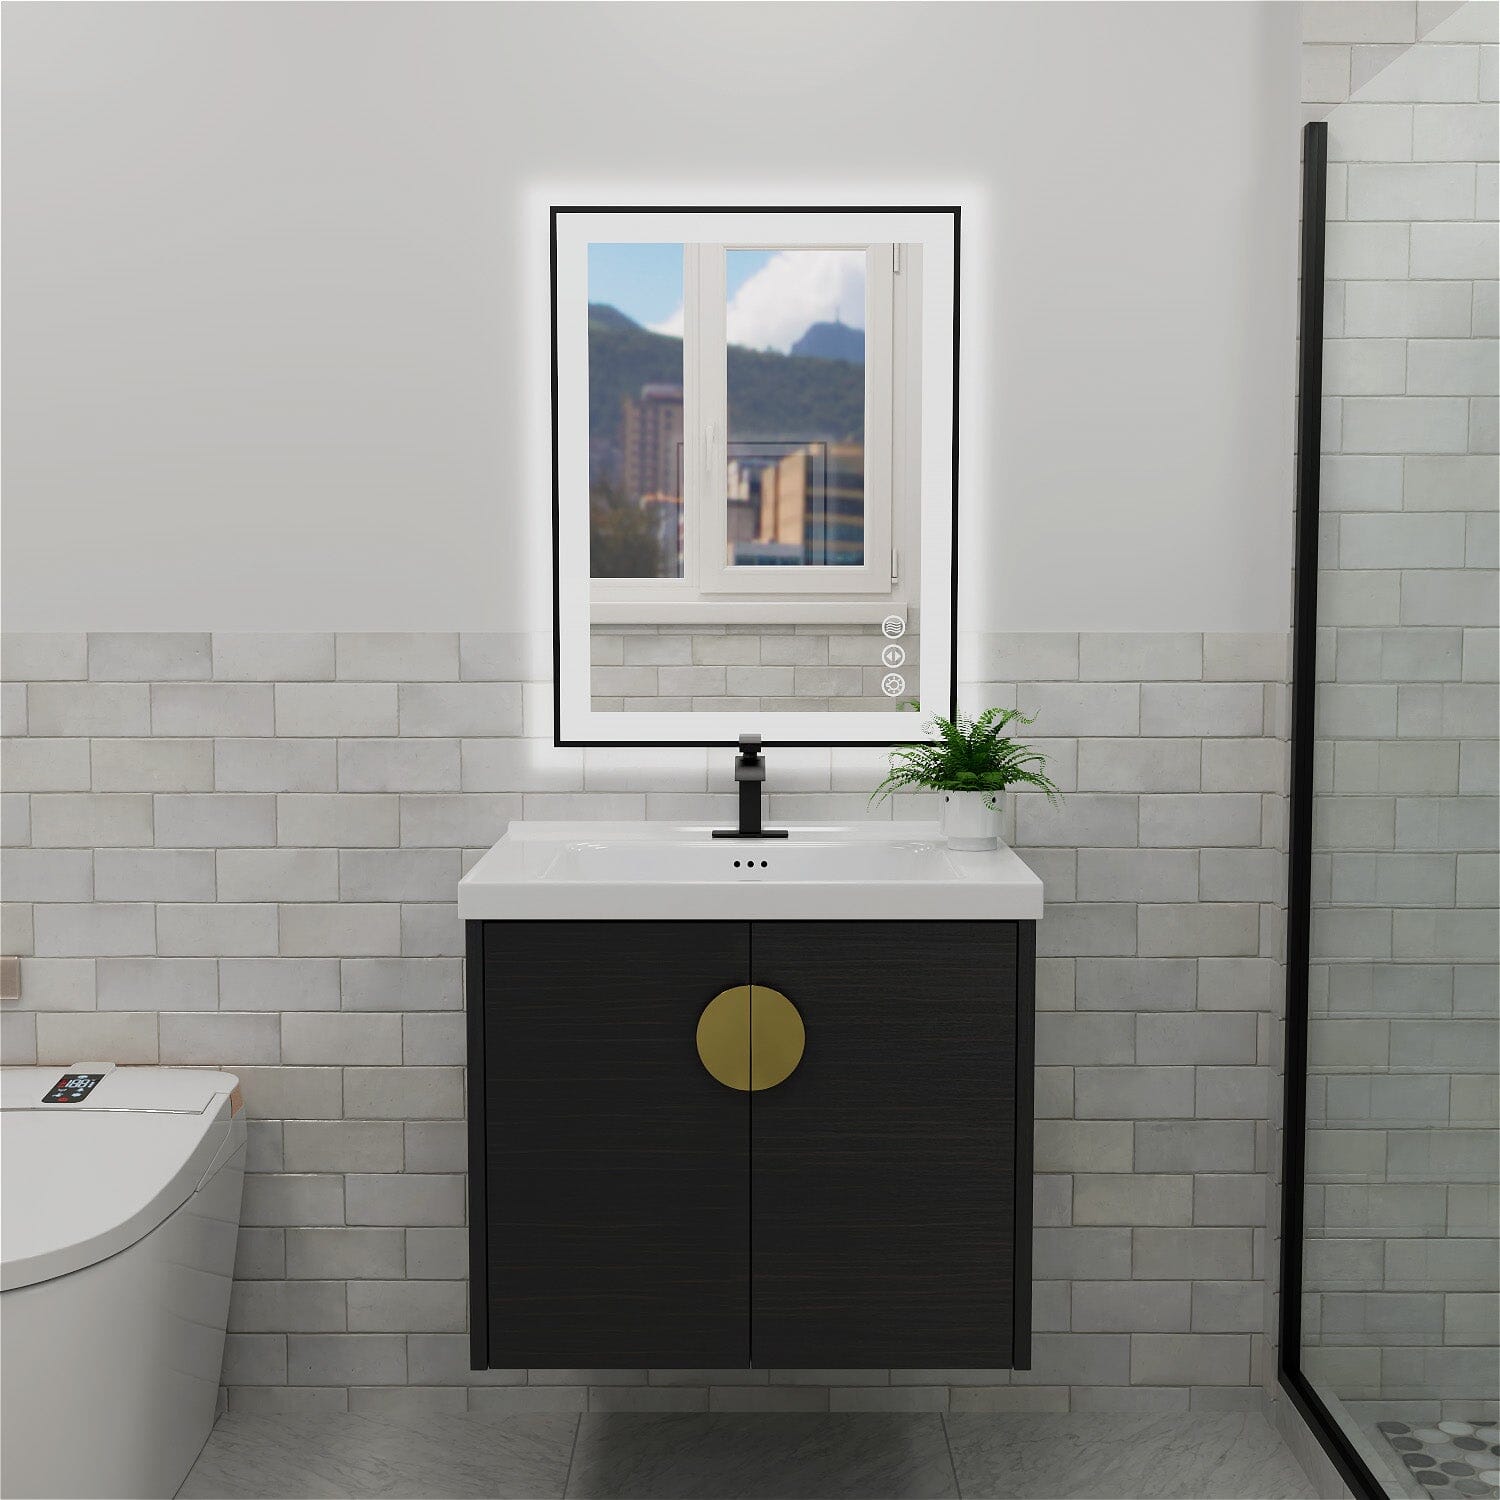 Dropship 55 In. W X 30 In. H LED Large Rectangular Frameless Anti-Fog  Bathroom Mirror Front & Backlit to Sell Online at a Lower Price